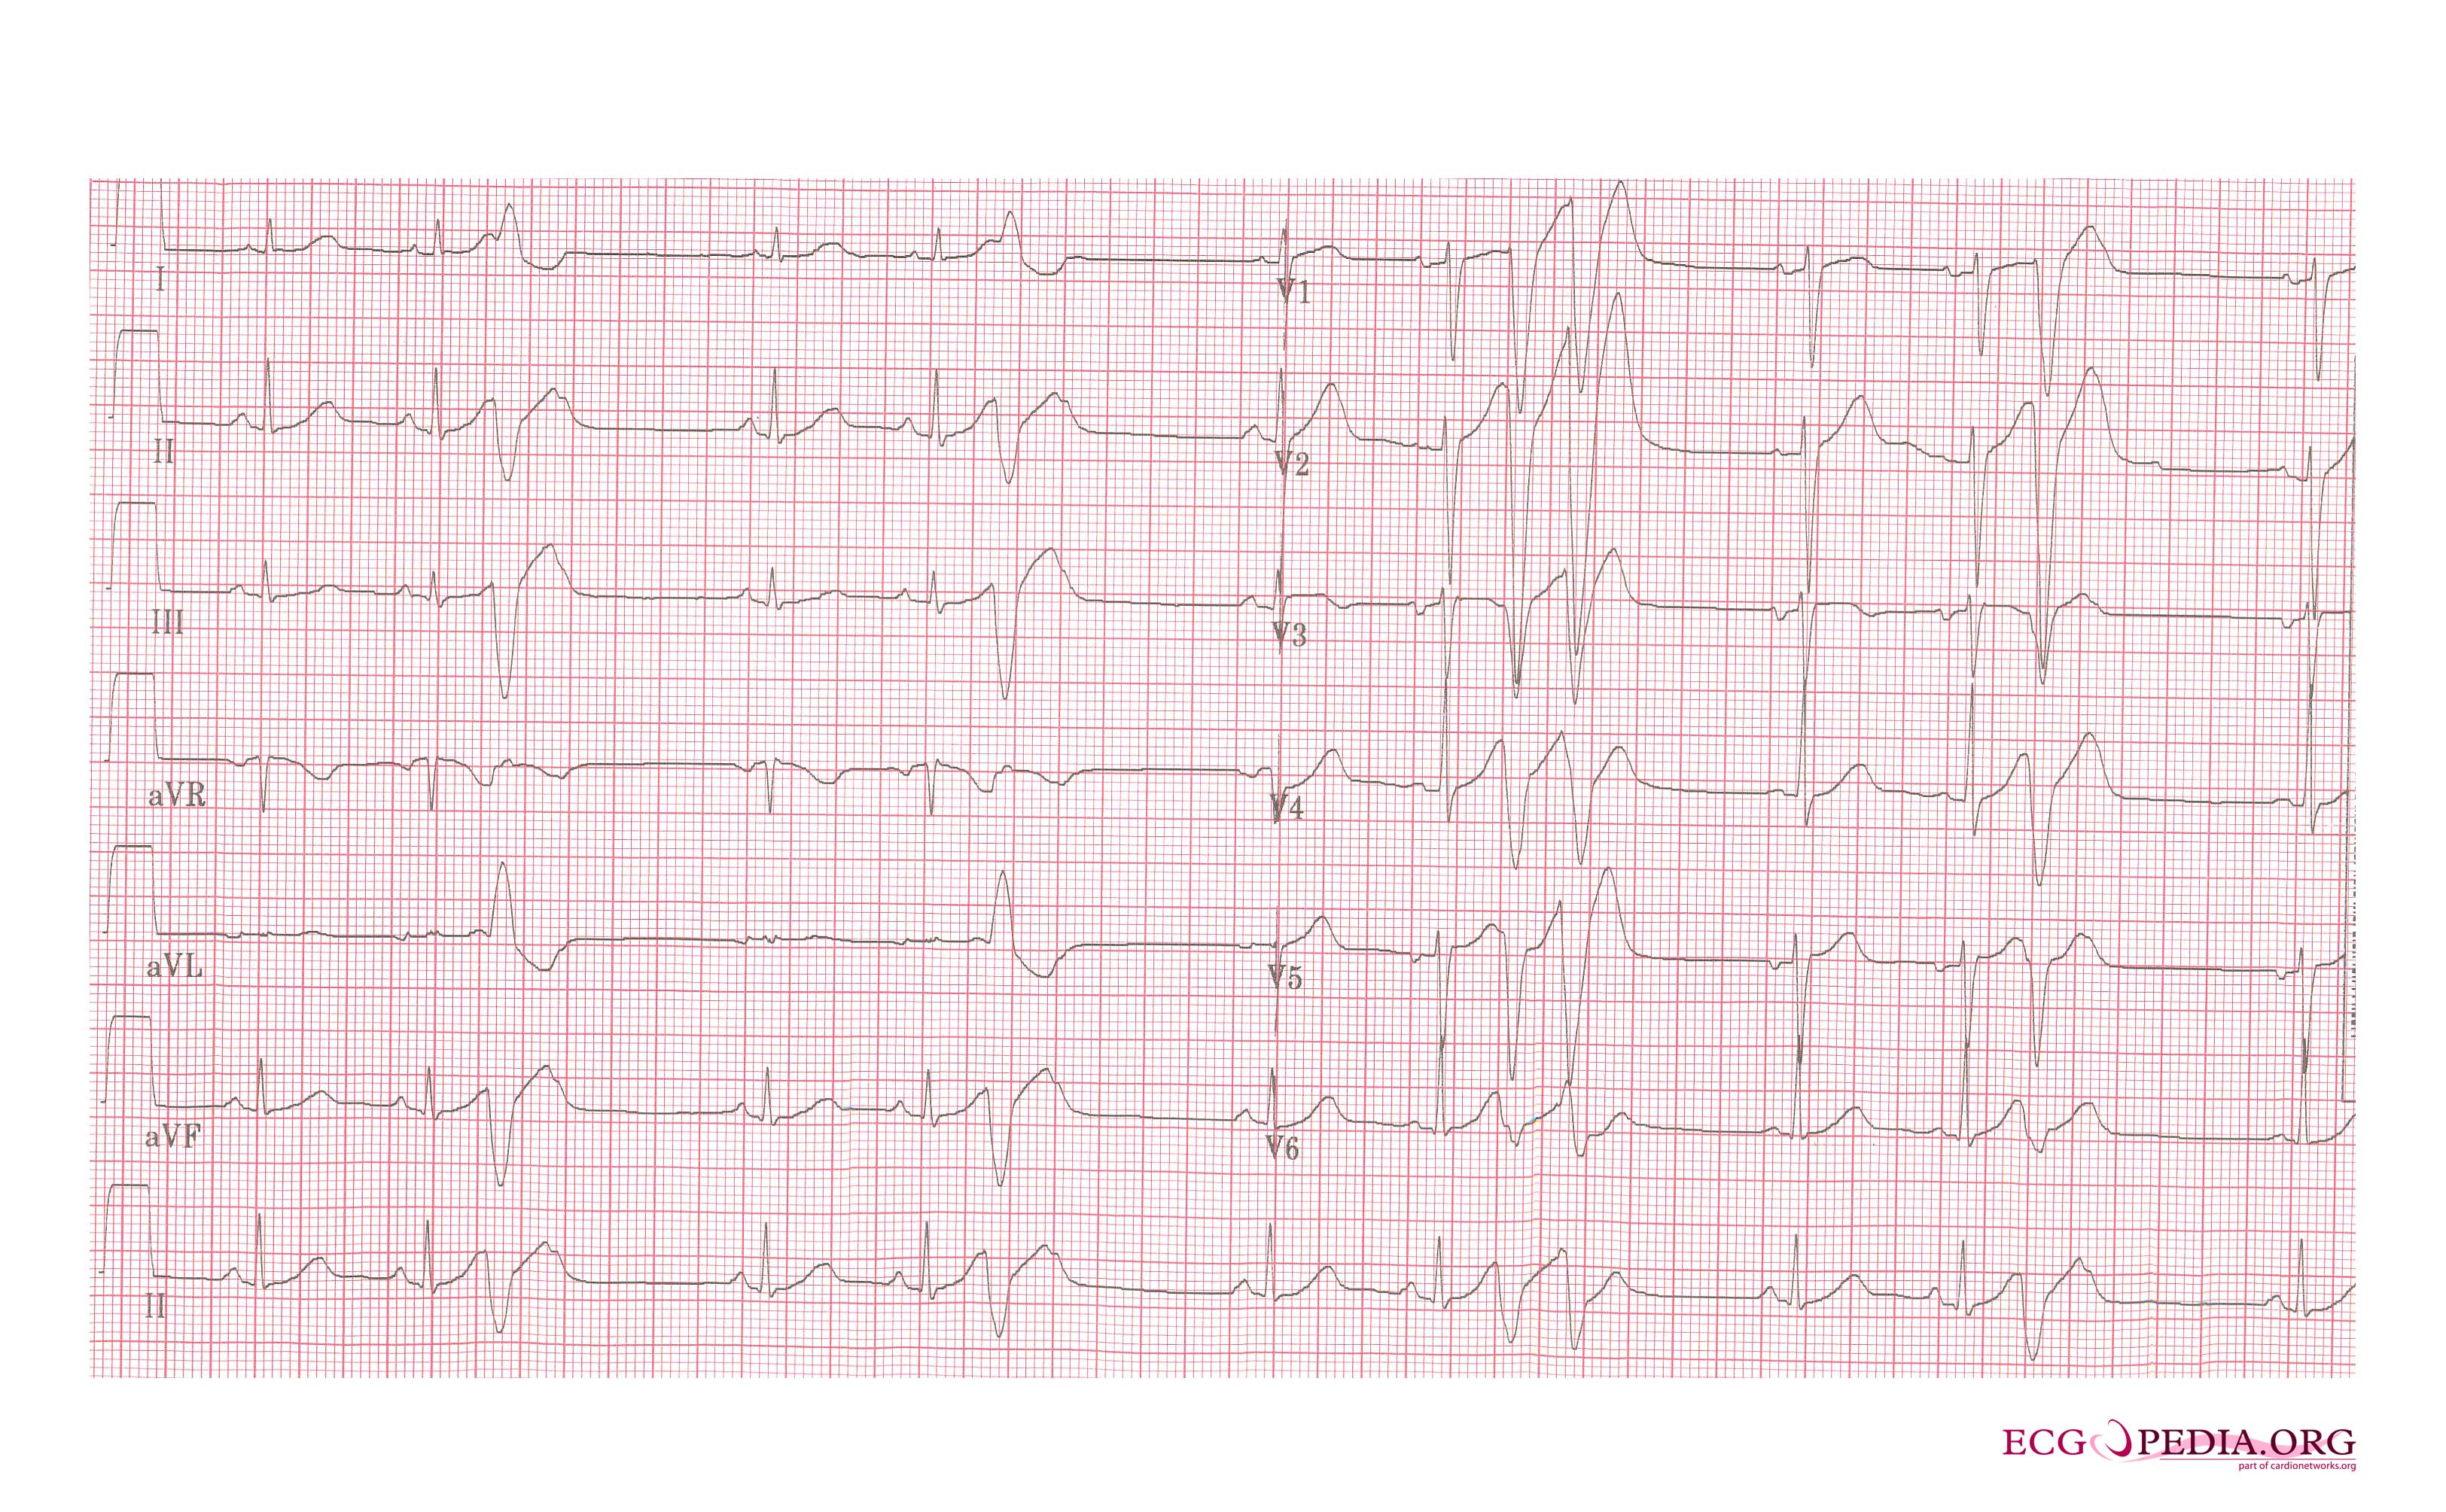 Arrhythmias in a patient with short coupled torsade de pointes: frequent short coupled extrasystoles[8]